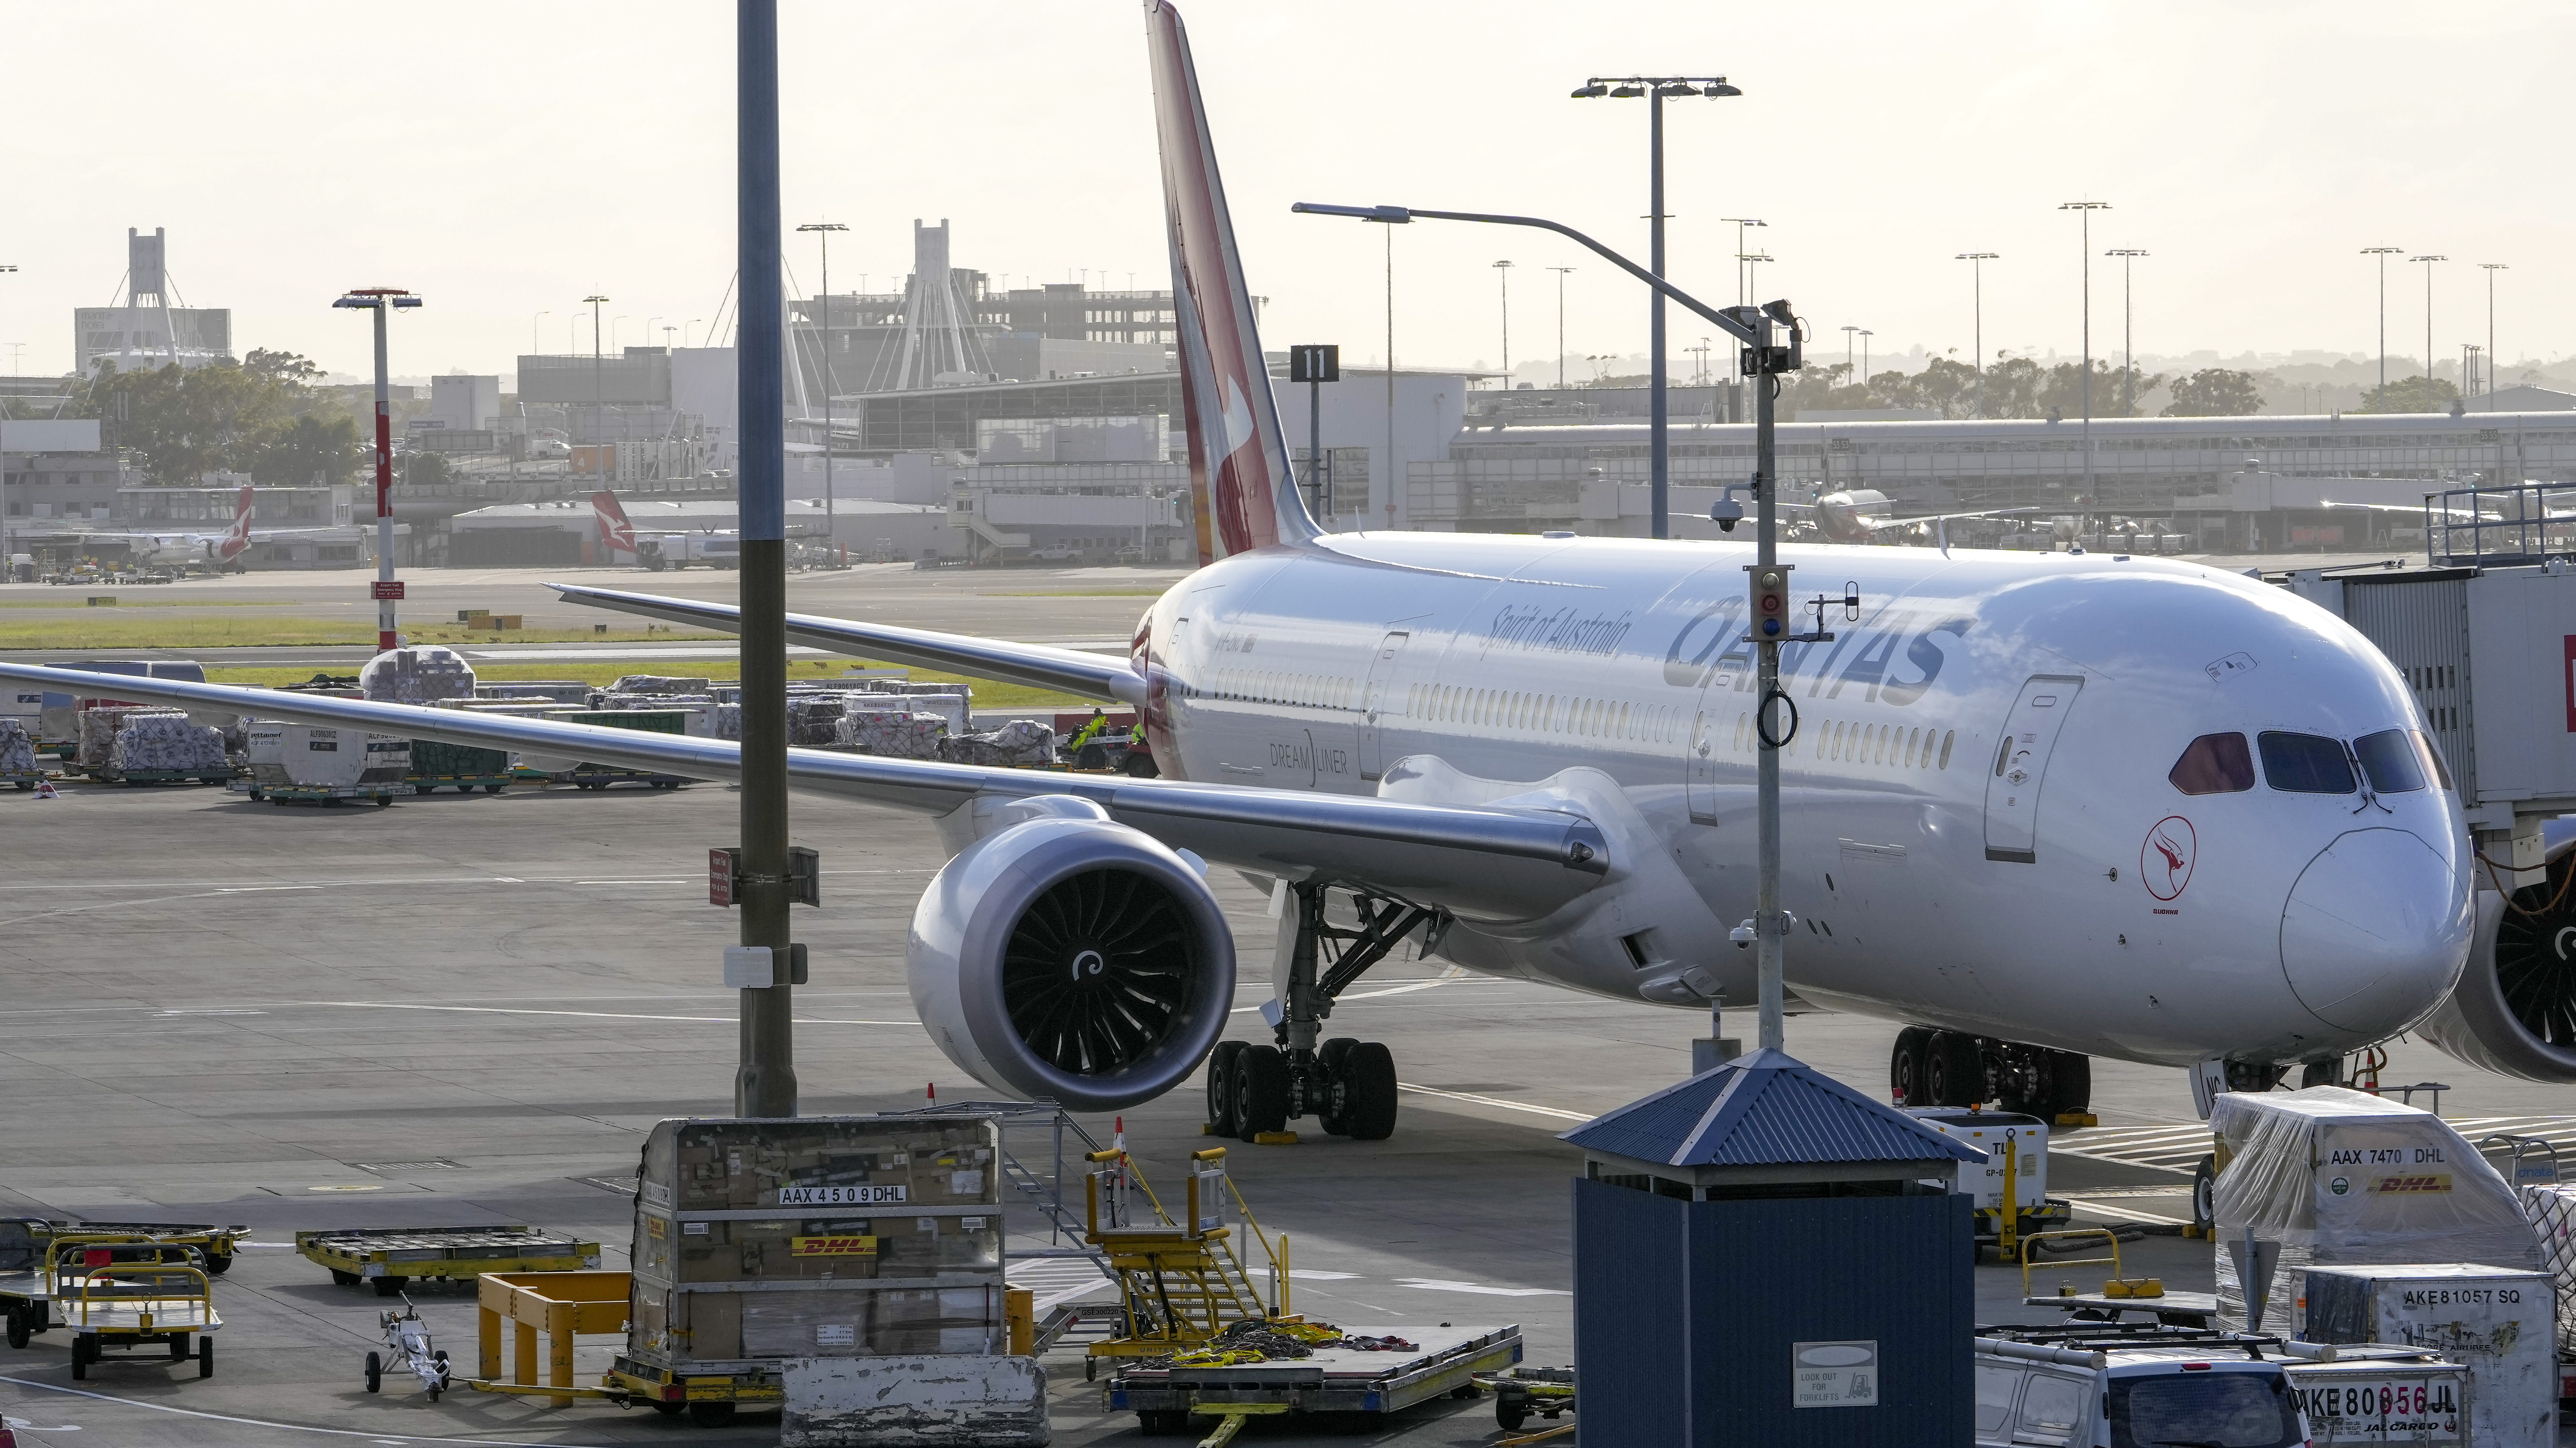 A plane arrives at Sydney Airport.